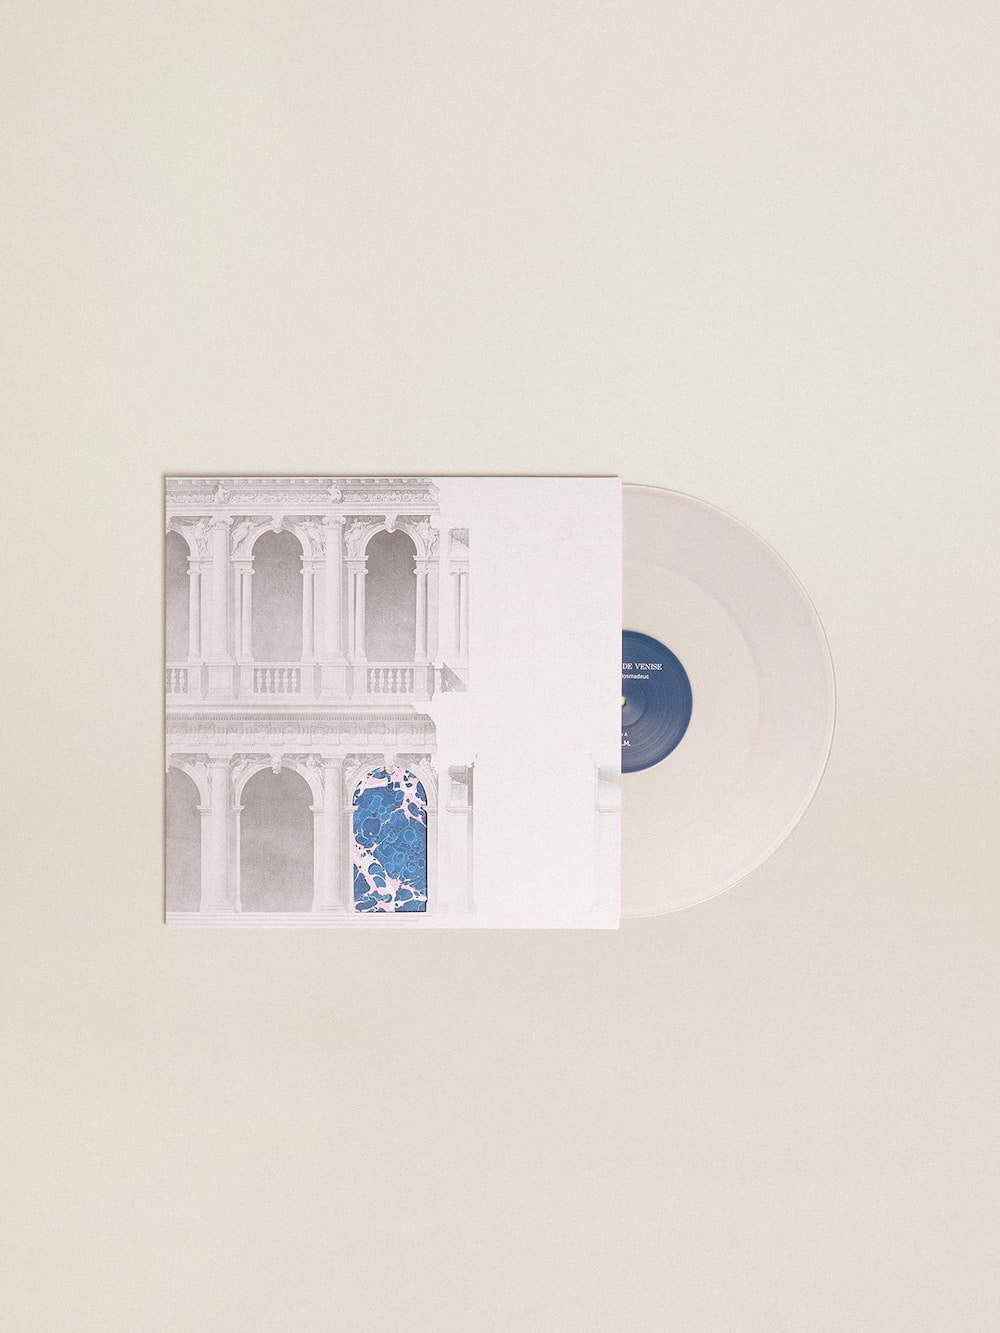 Golden Goose - “Sounds Of Venice” record Dreamed By Rupture Arts & Books HAUS of Dreamers exclusive in 